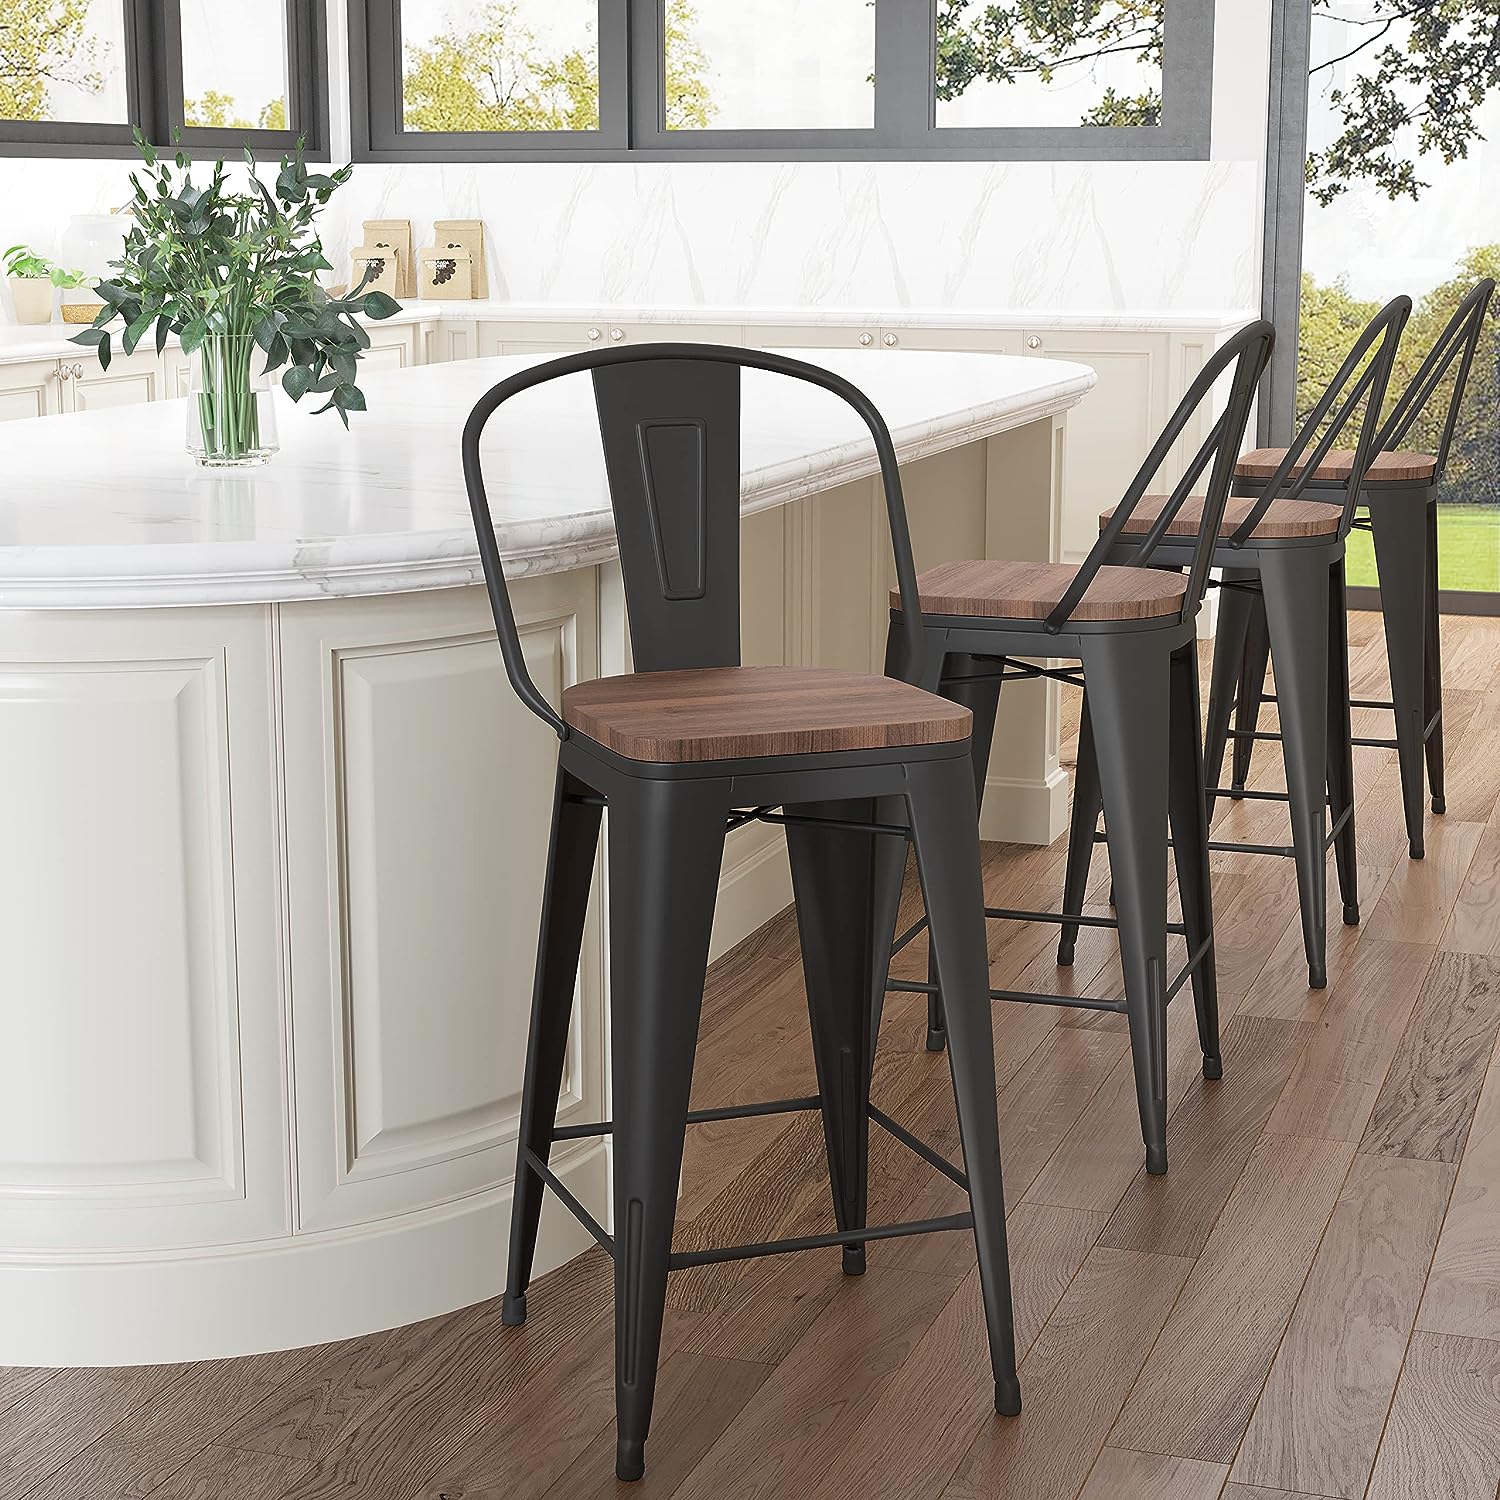 unique modern farmhouse bar stools with backs arched backrest metal frame galvanized steel kitchen theme tapered legs bistro style seating for bar height or counter height tables